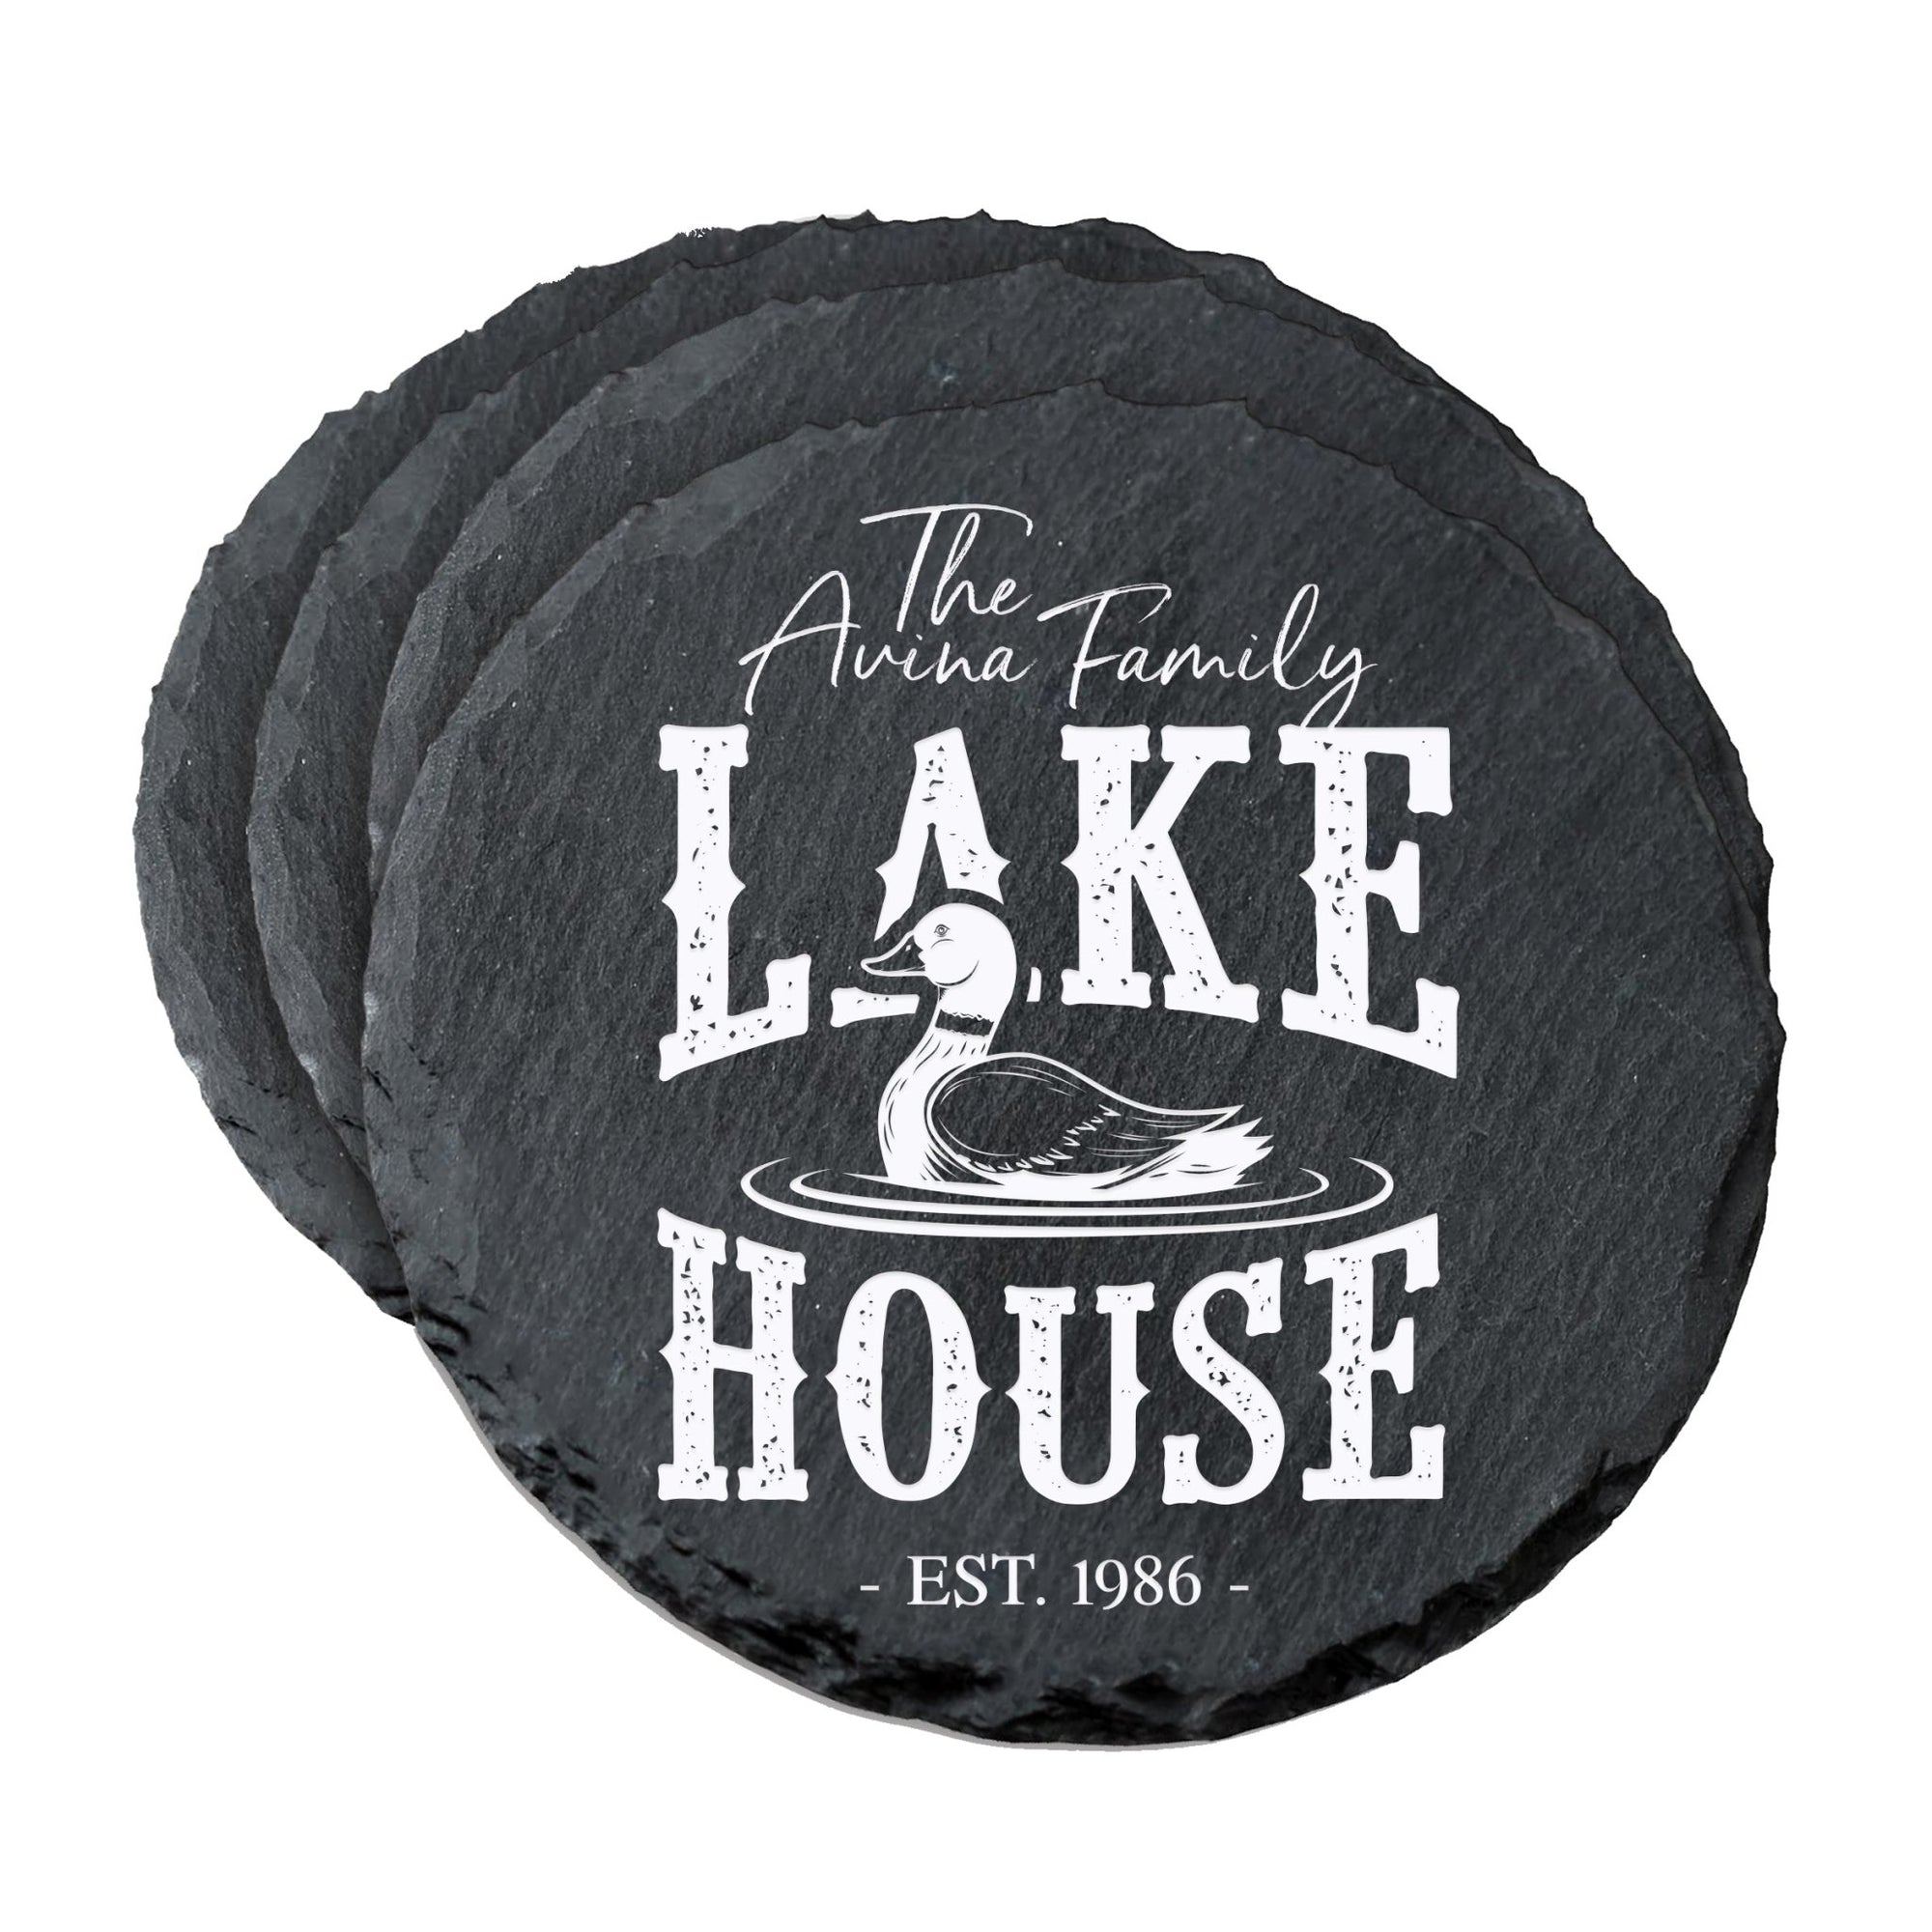 Custom 6pc Coaster Set Kitchen and Tabletop Decorations 4x4 Gift for Family Lake Houses - LifeSong Milestones